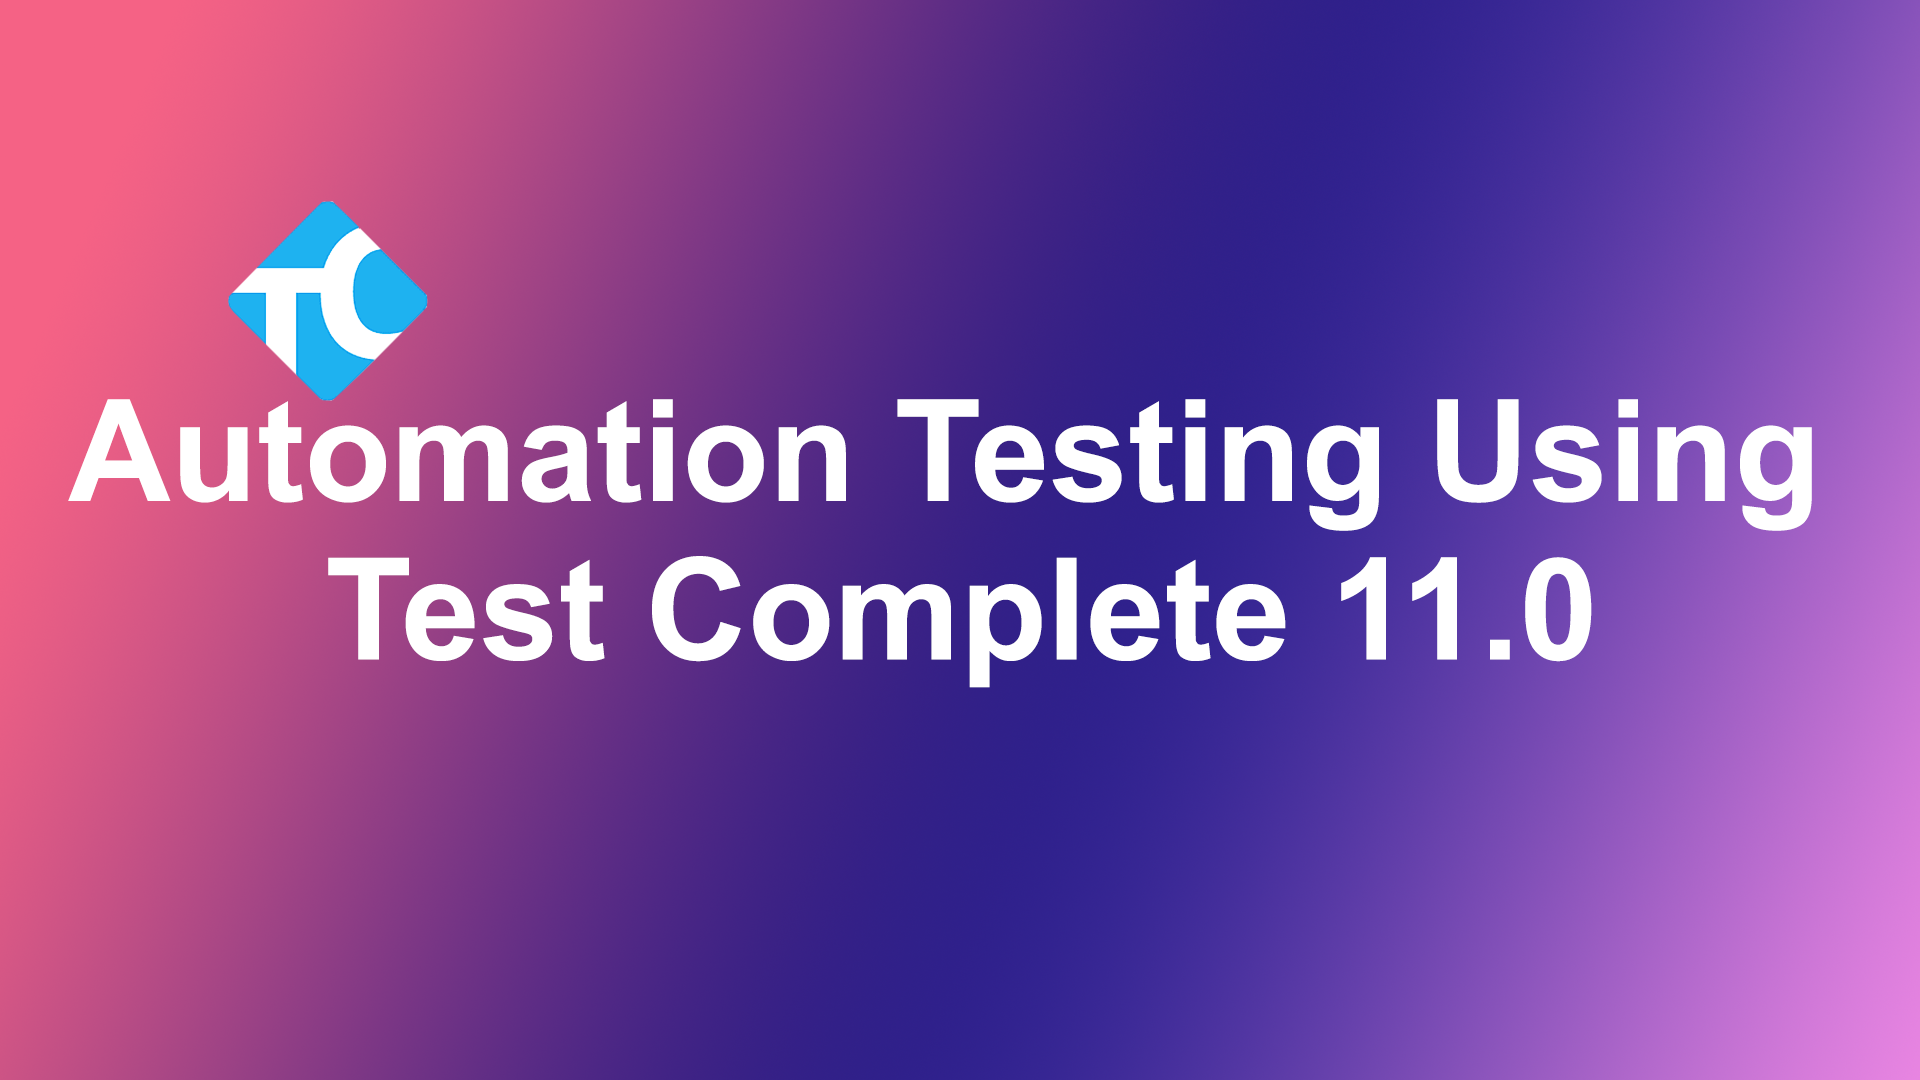 Automation Testing using Test Complete 11.0